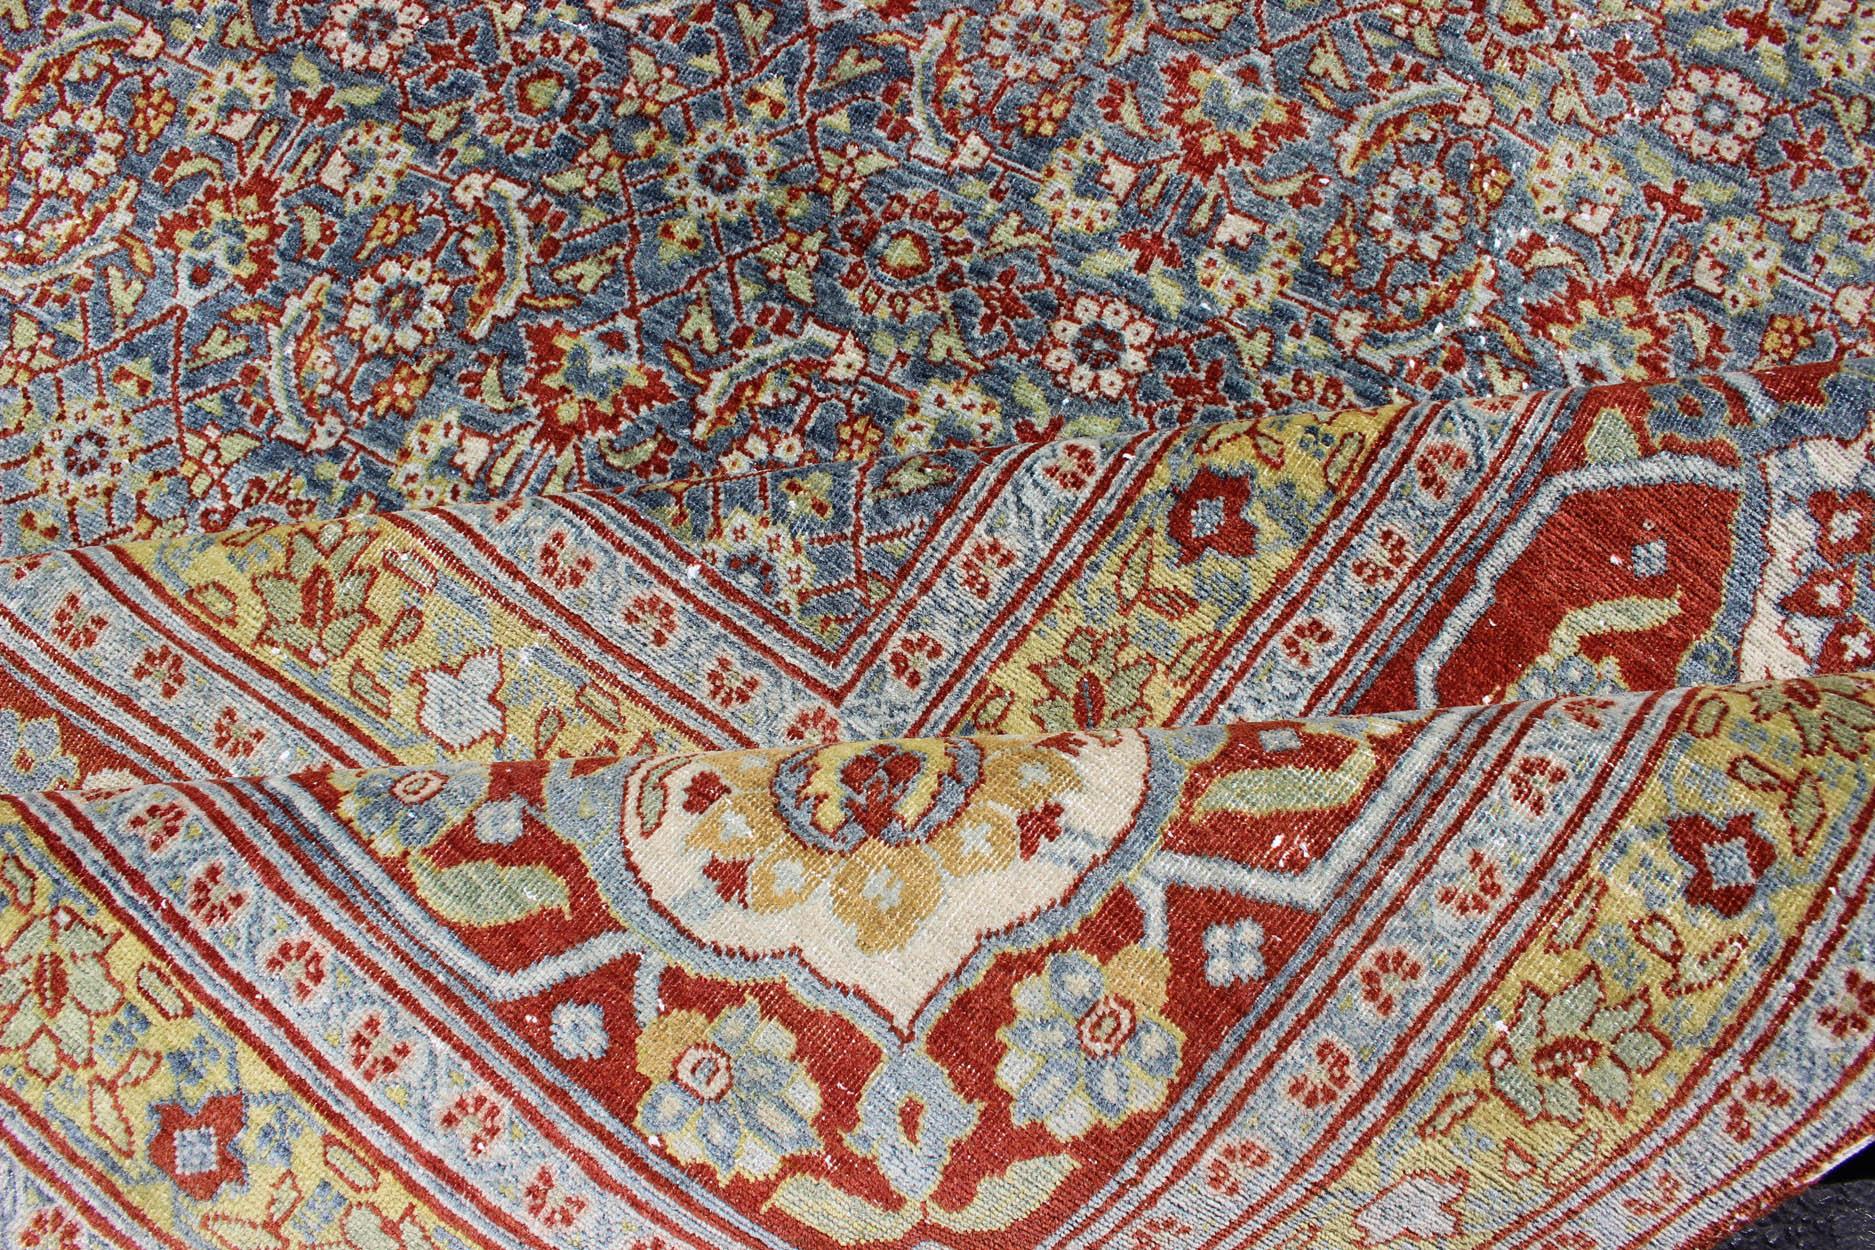 Early 20th Century Large All-Over Geometric Antique Persian Tabriz Rug in Blue, Gray, and Red Tones For Sale